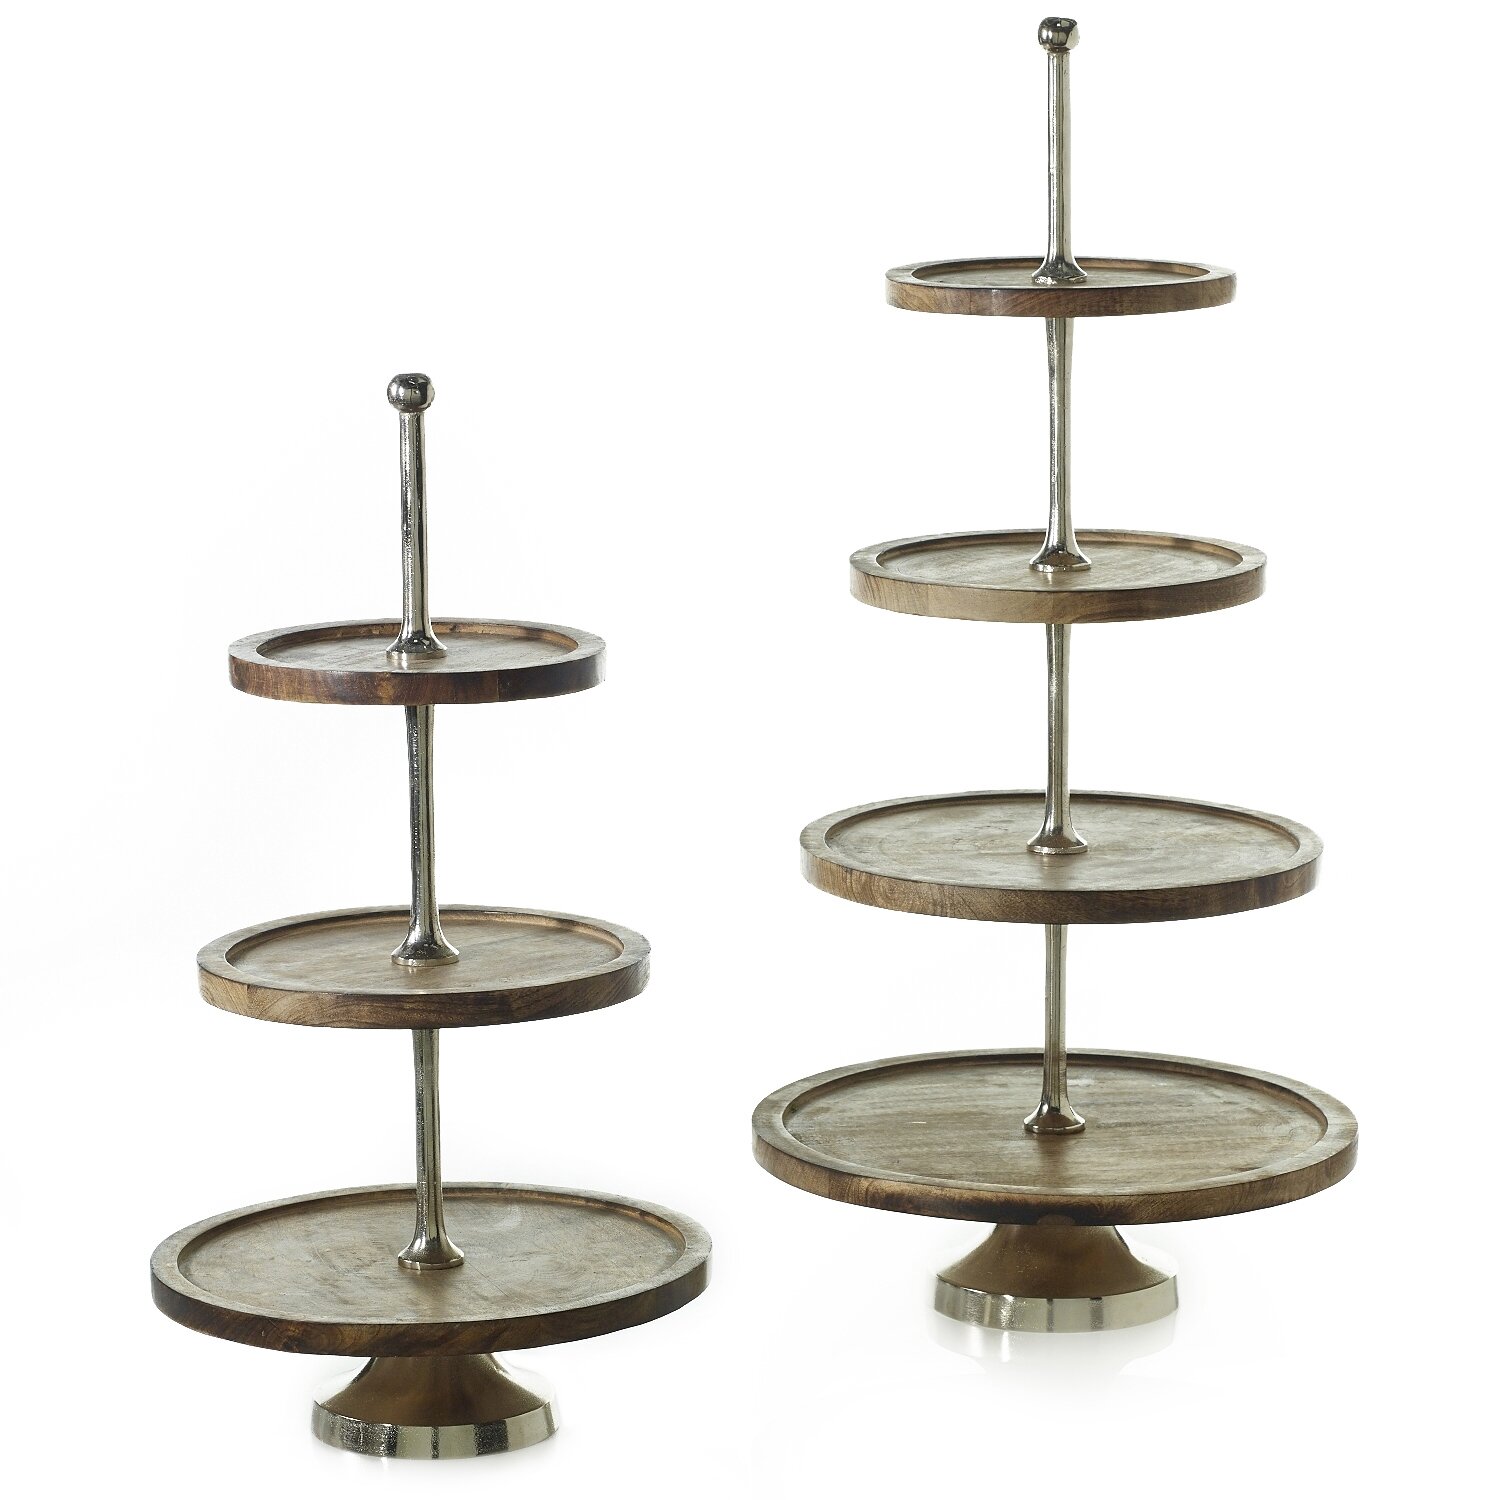 Emmie Stand (1) $75 63.5” tall 